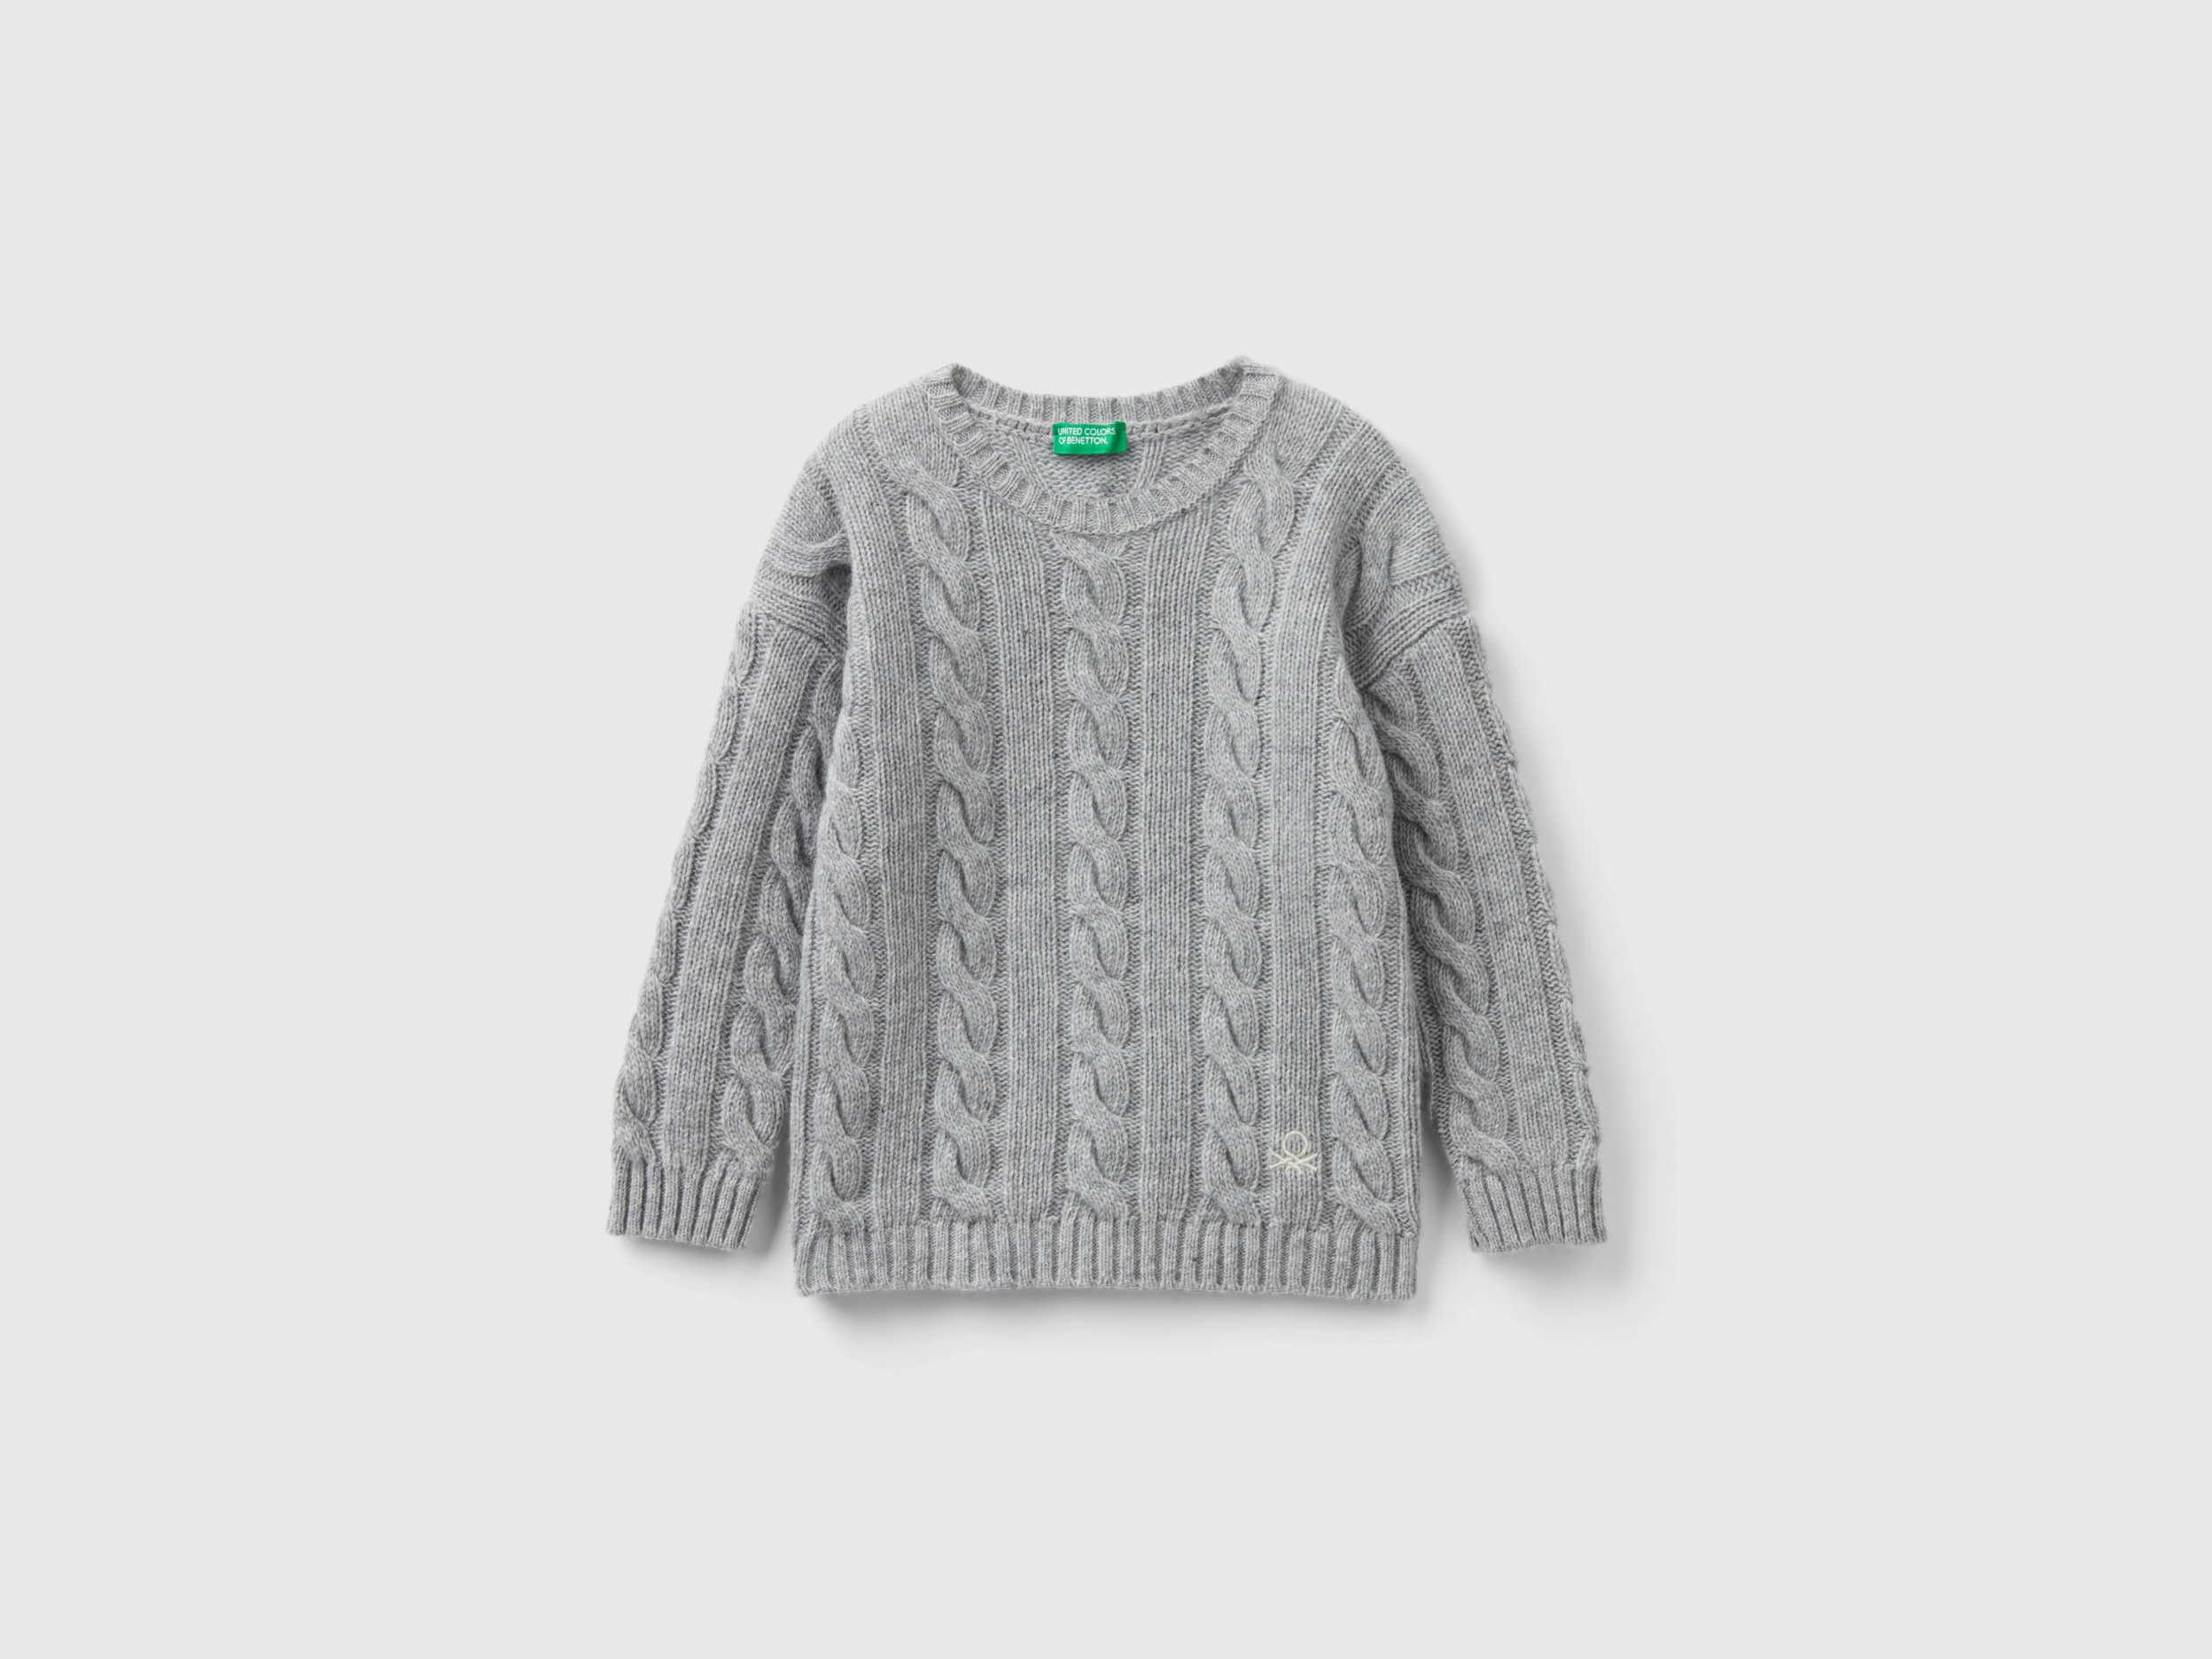 Benetton, Cable Knit Sweater In Wool Blend, size 4-5, Gray, Kids